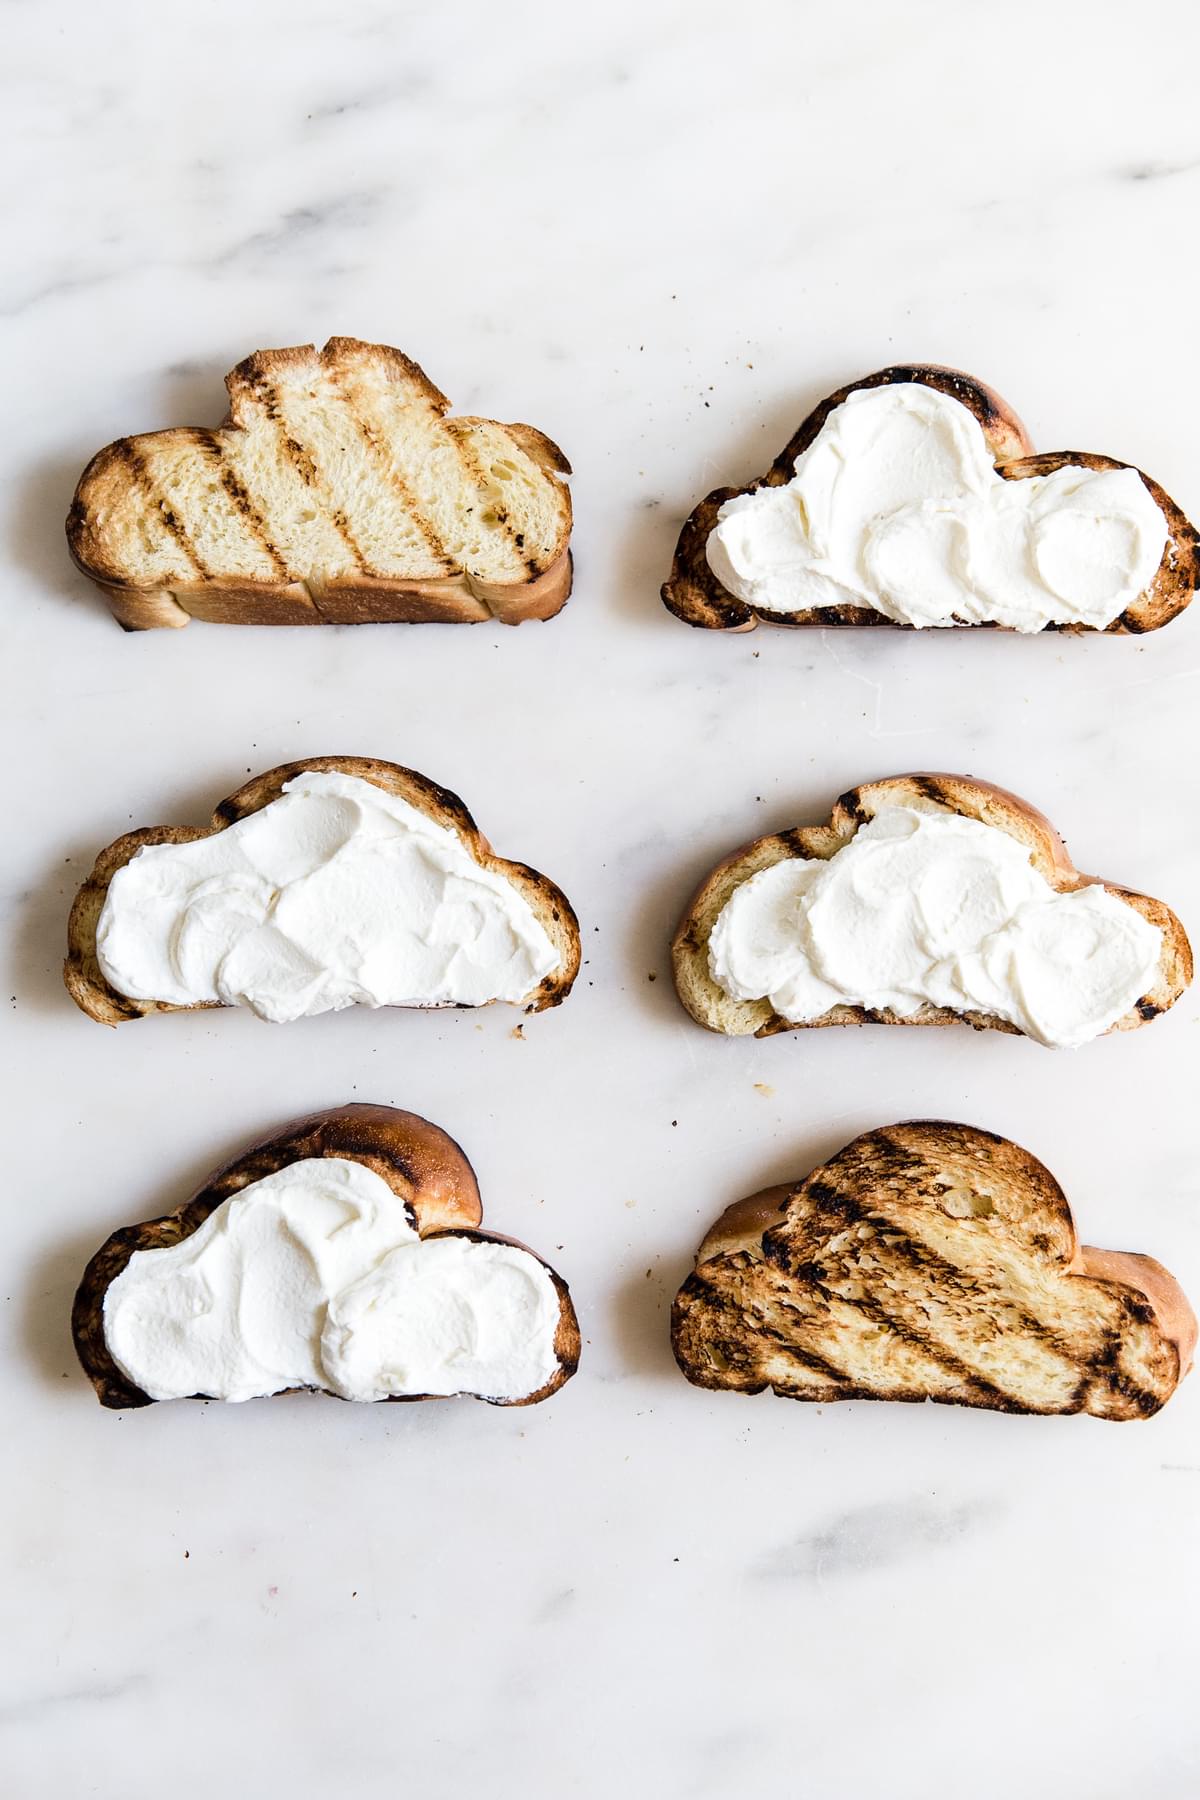 6 slices of Grilled Challah bread with whipped mascarpone and yogurt spread on it